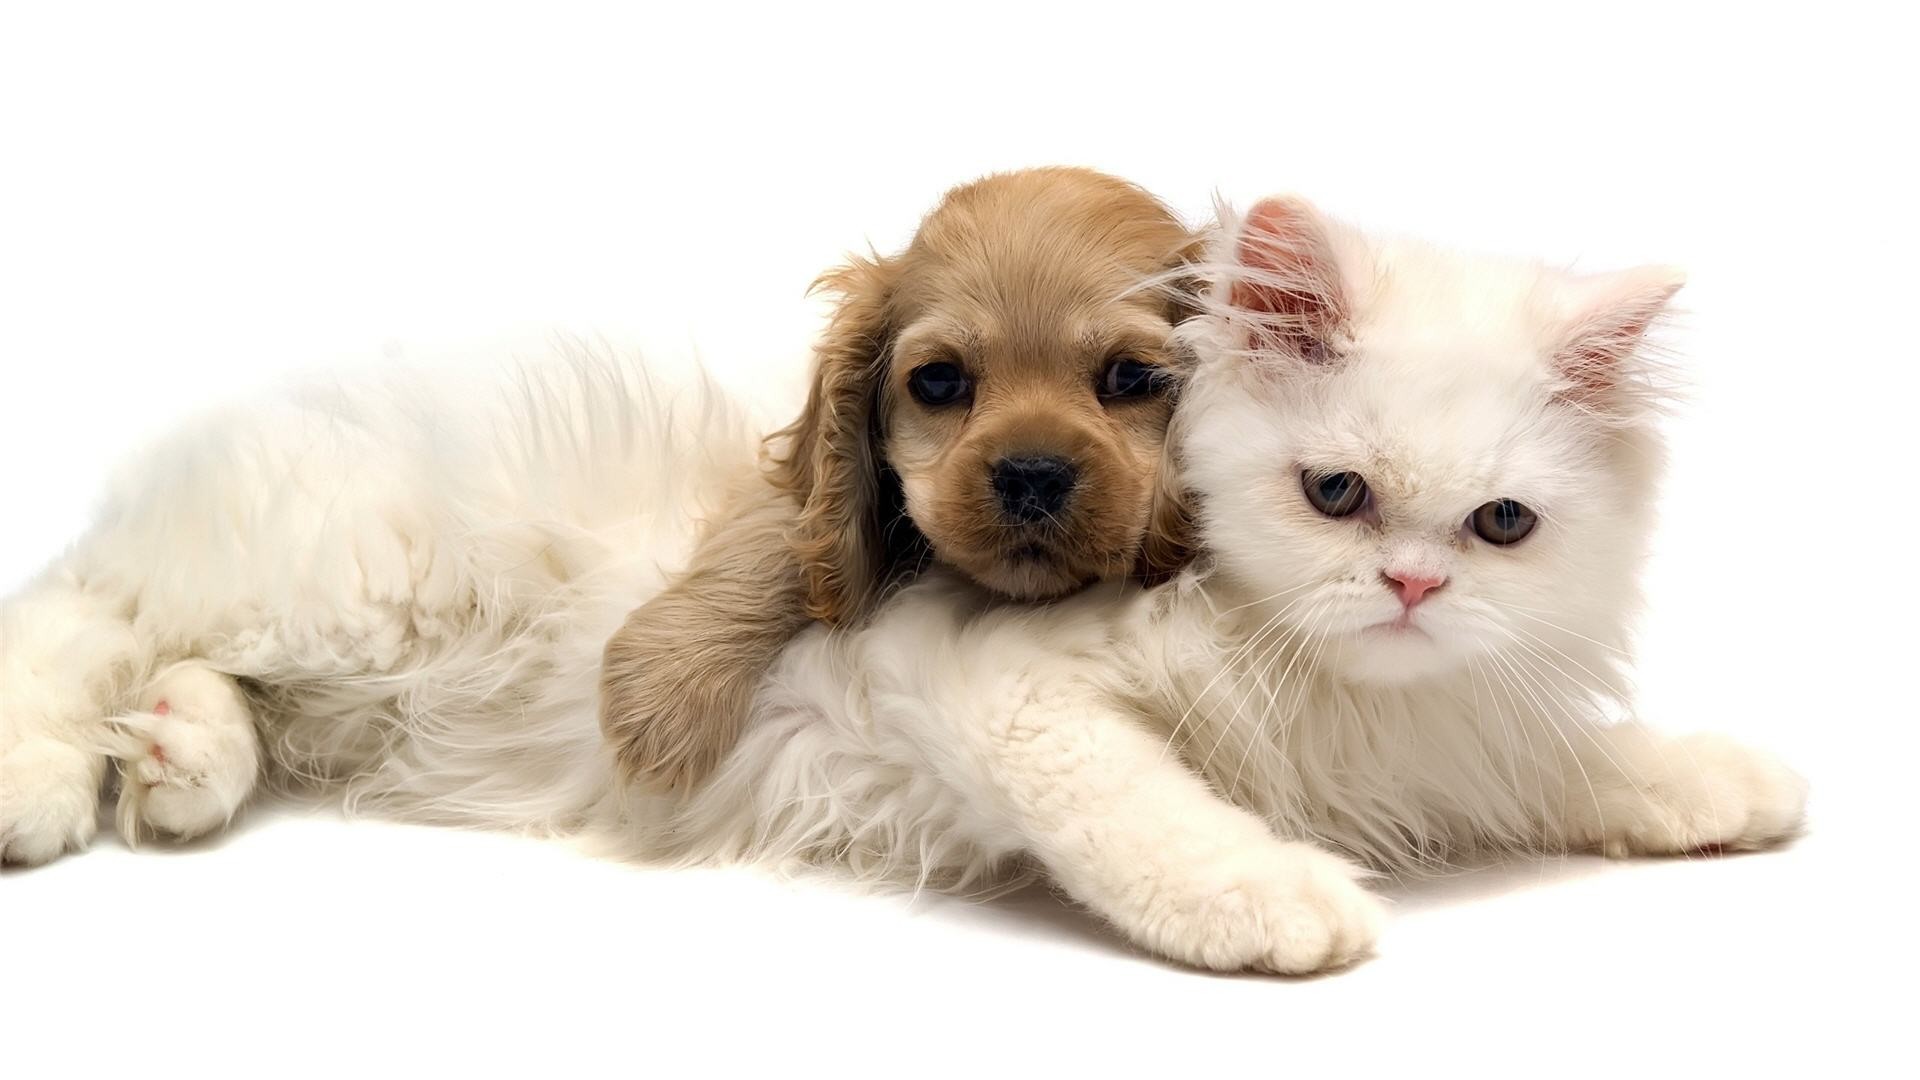 1920x1080 Adorable Cat and Dog Wallpaper | Wallpapers Green Cat Cute And Dog Jpg   | #